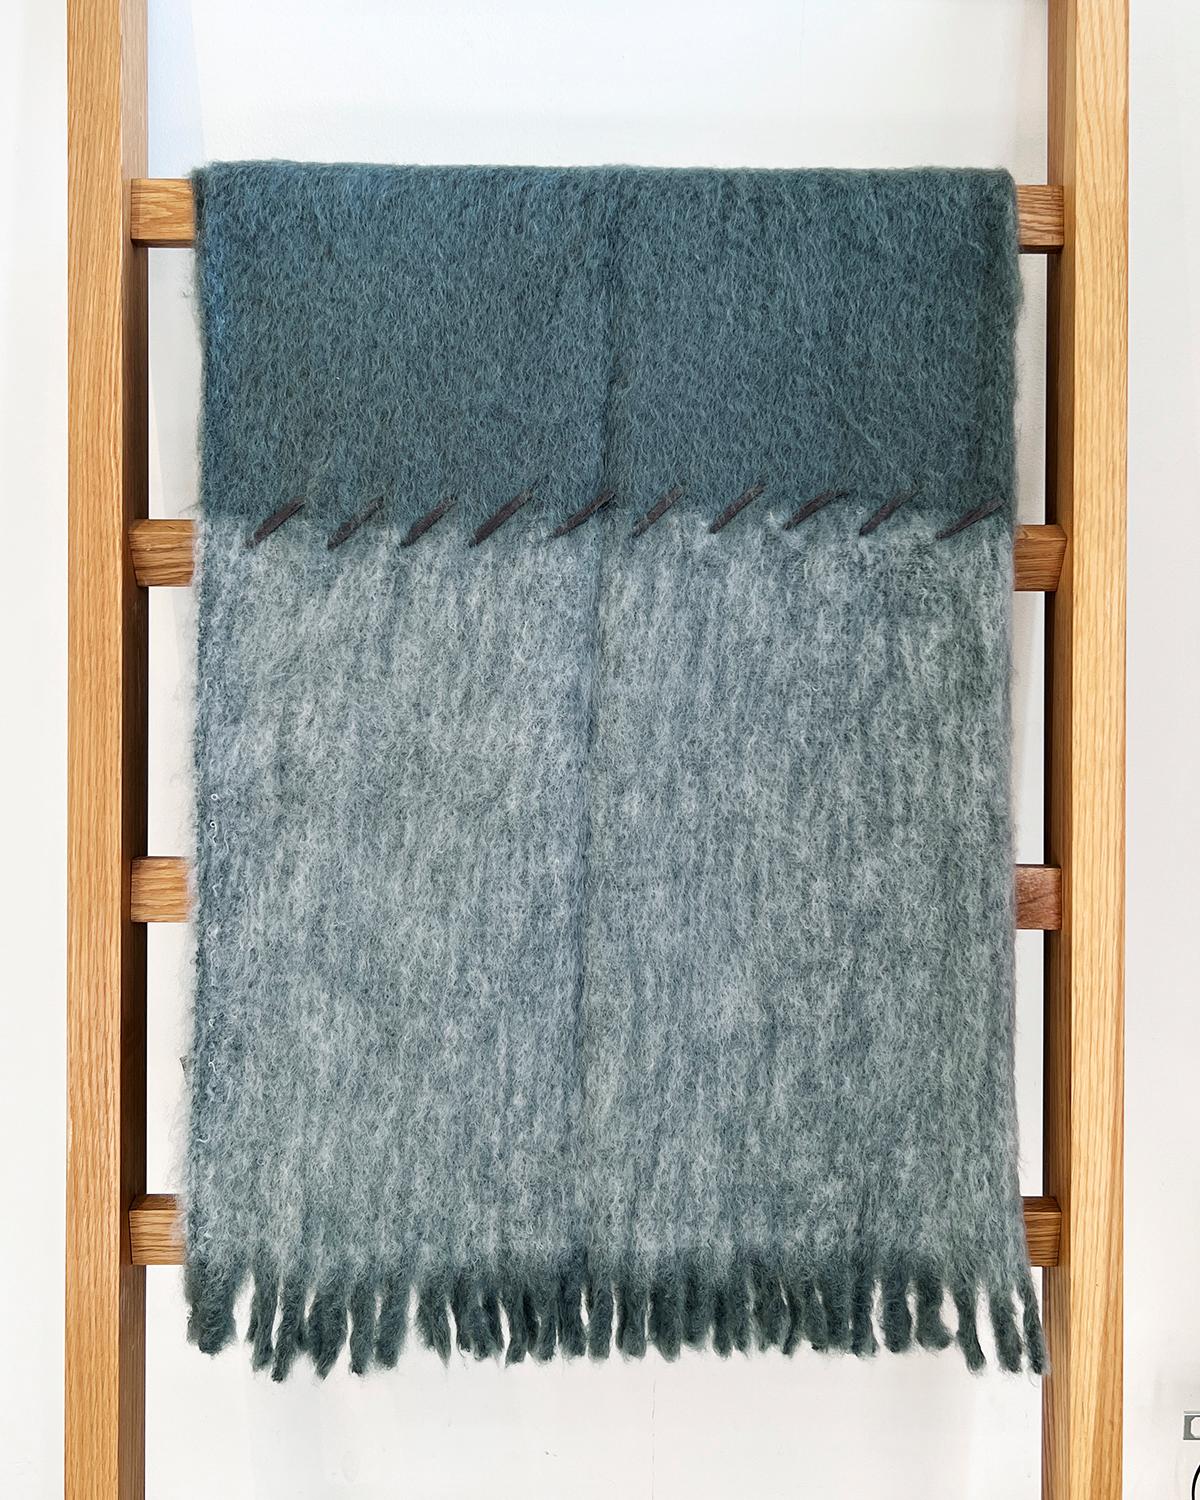 This cozy and warm Steam and Smoke Mohair Throw is perfect for home décor. The soft and fuzzy mohair features a color block with dark and light gray hues, designed to add a chic touch to any bedroom or living room. The suede whipstitch provides a